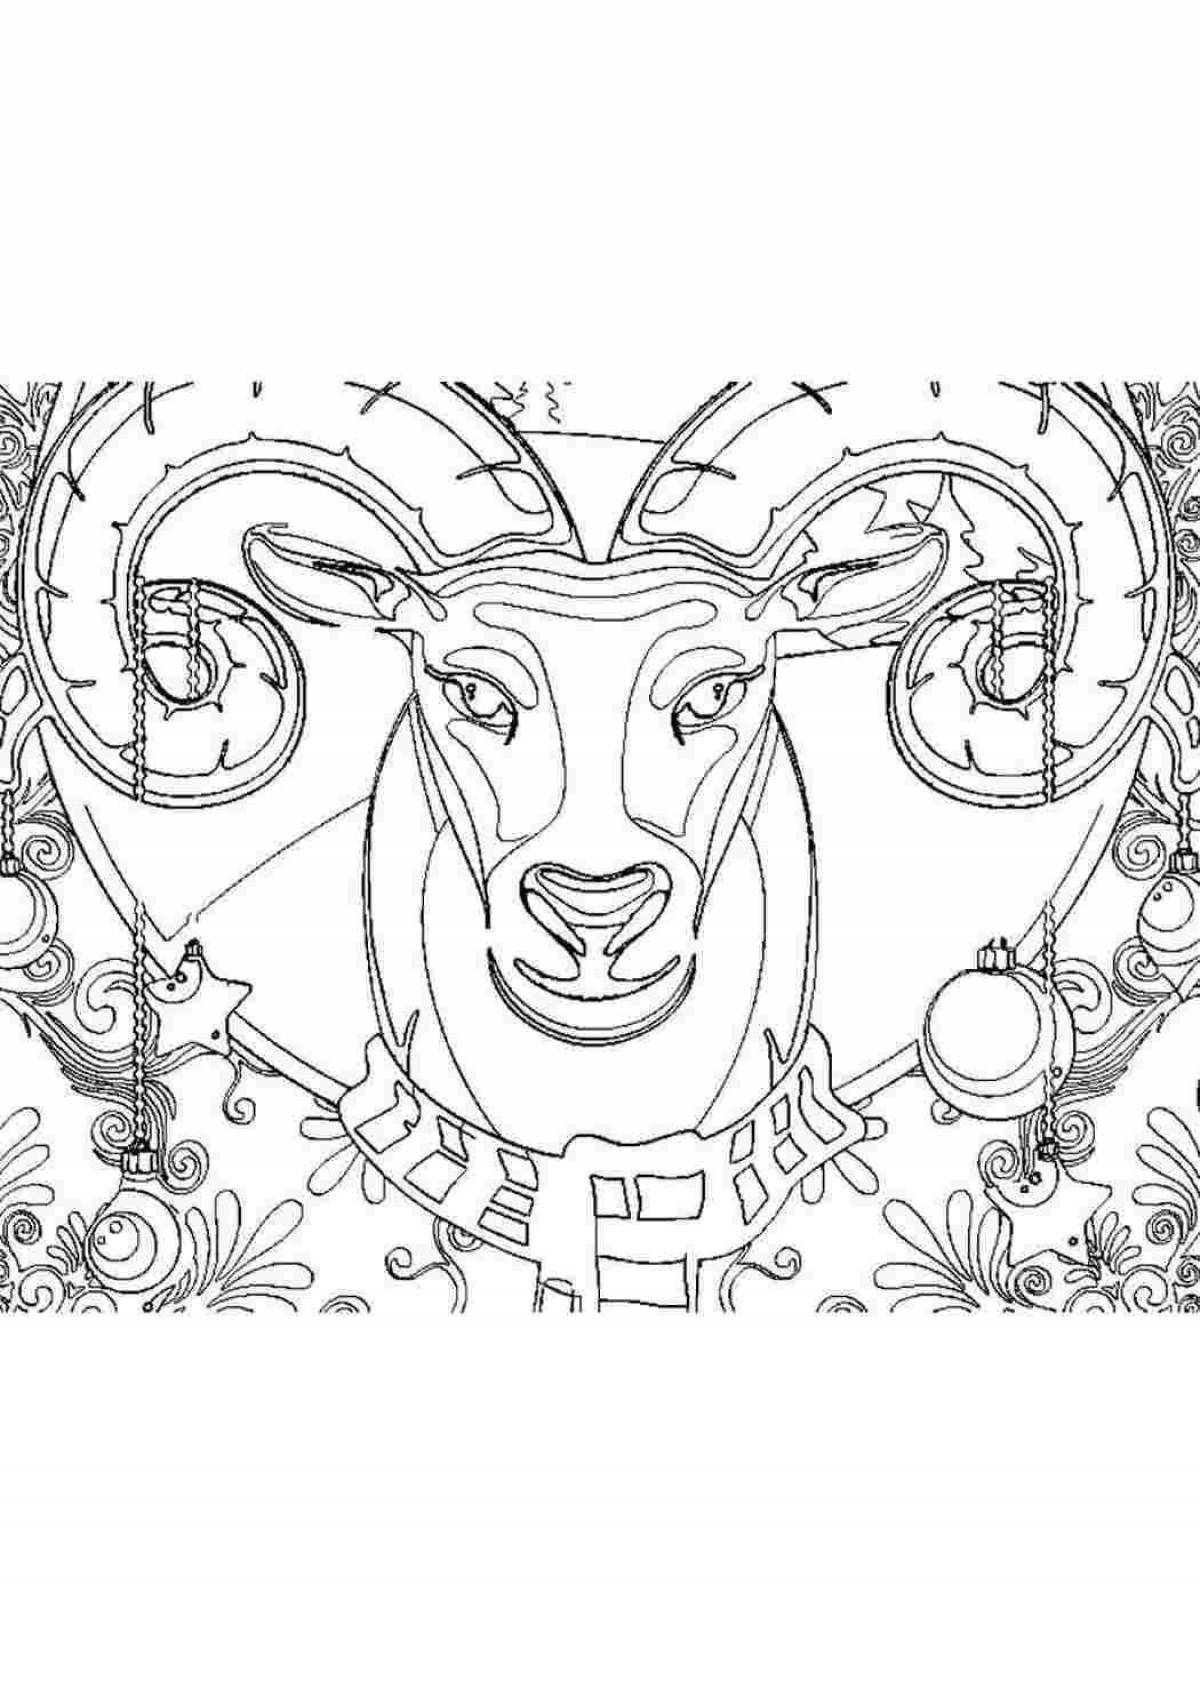 Coloring book dazzling Aries